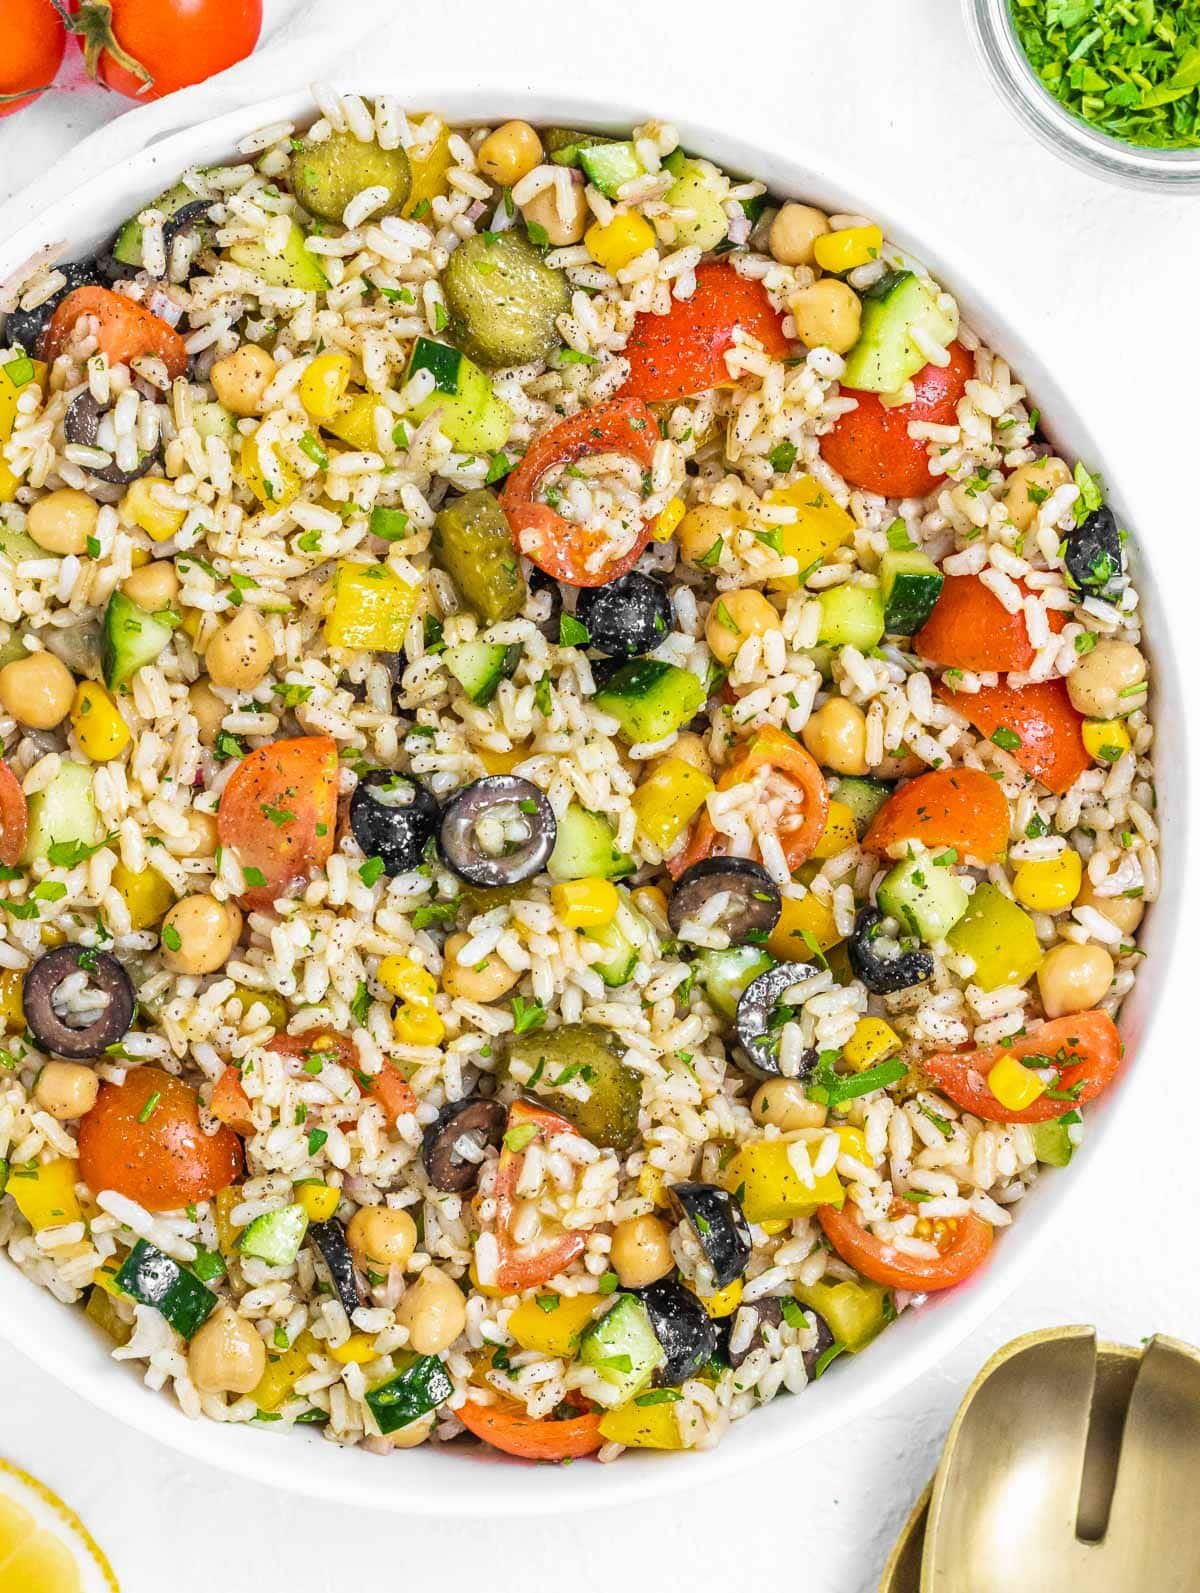 Rice salad with pepper and tomatoes